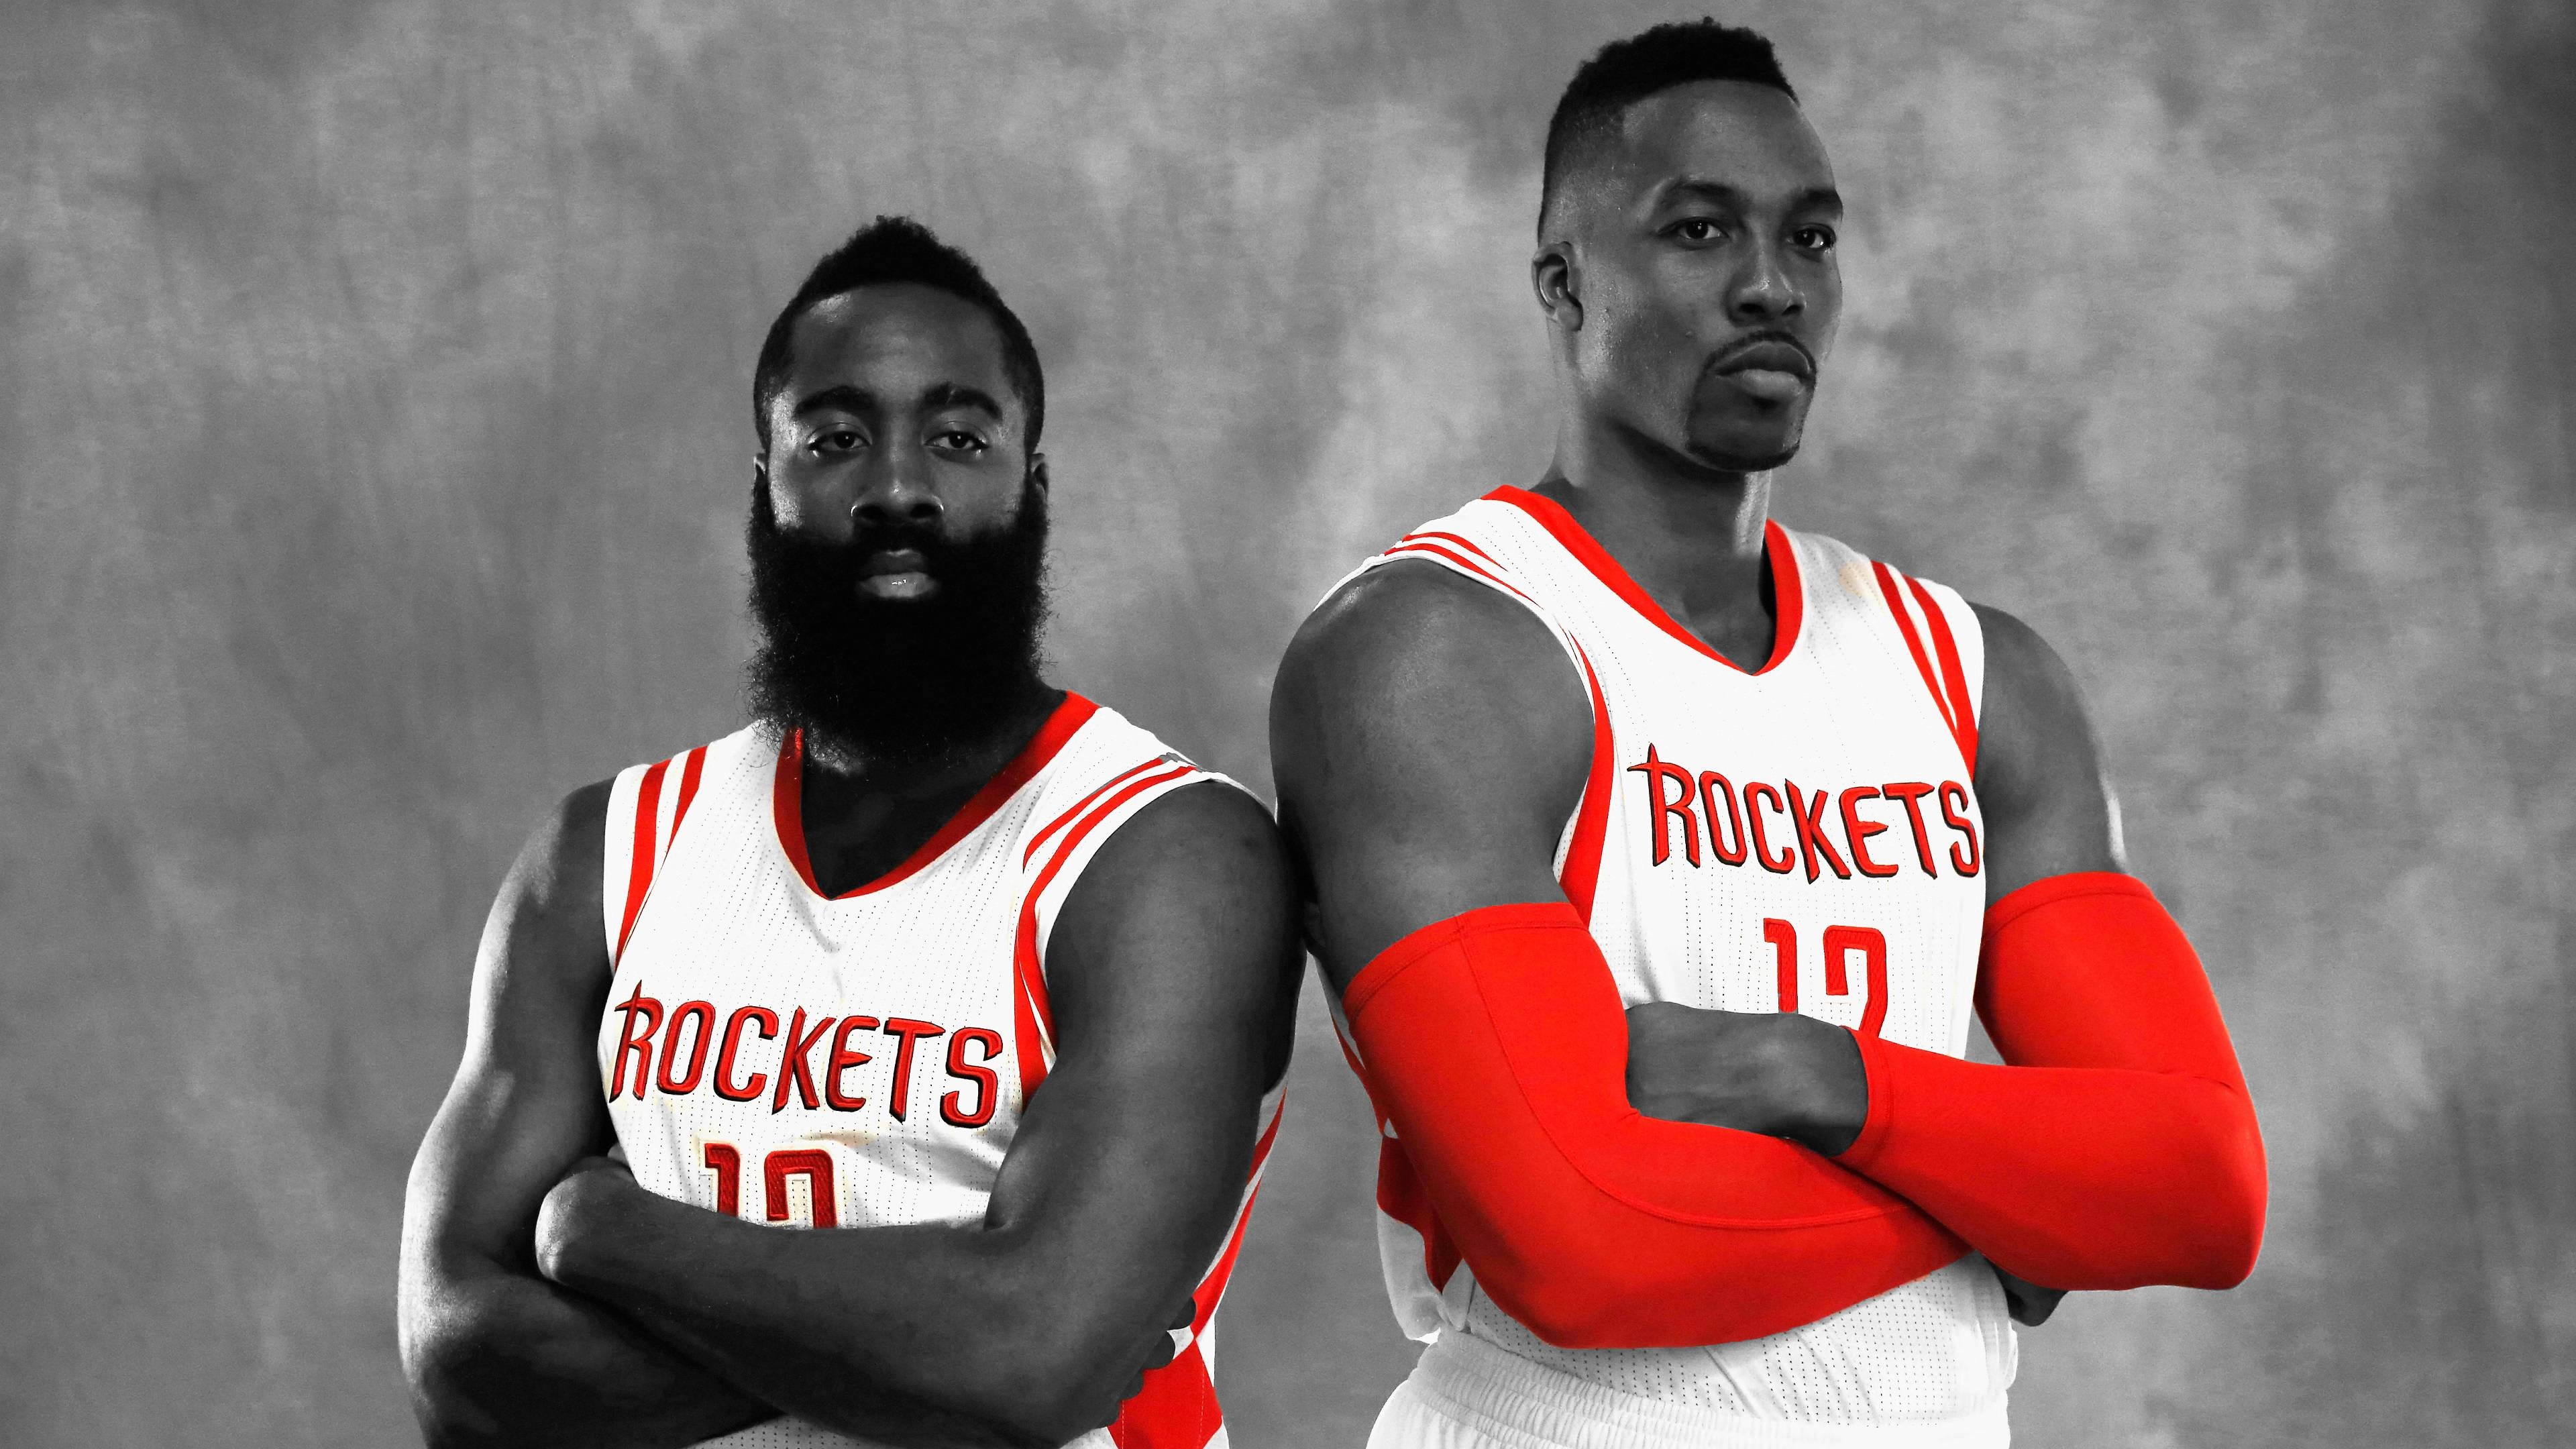 I edited a picture of Harden & Howard to make a wallpaper …